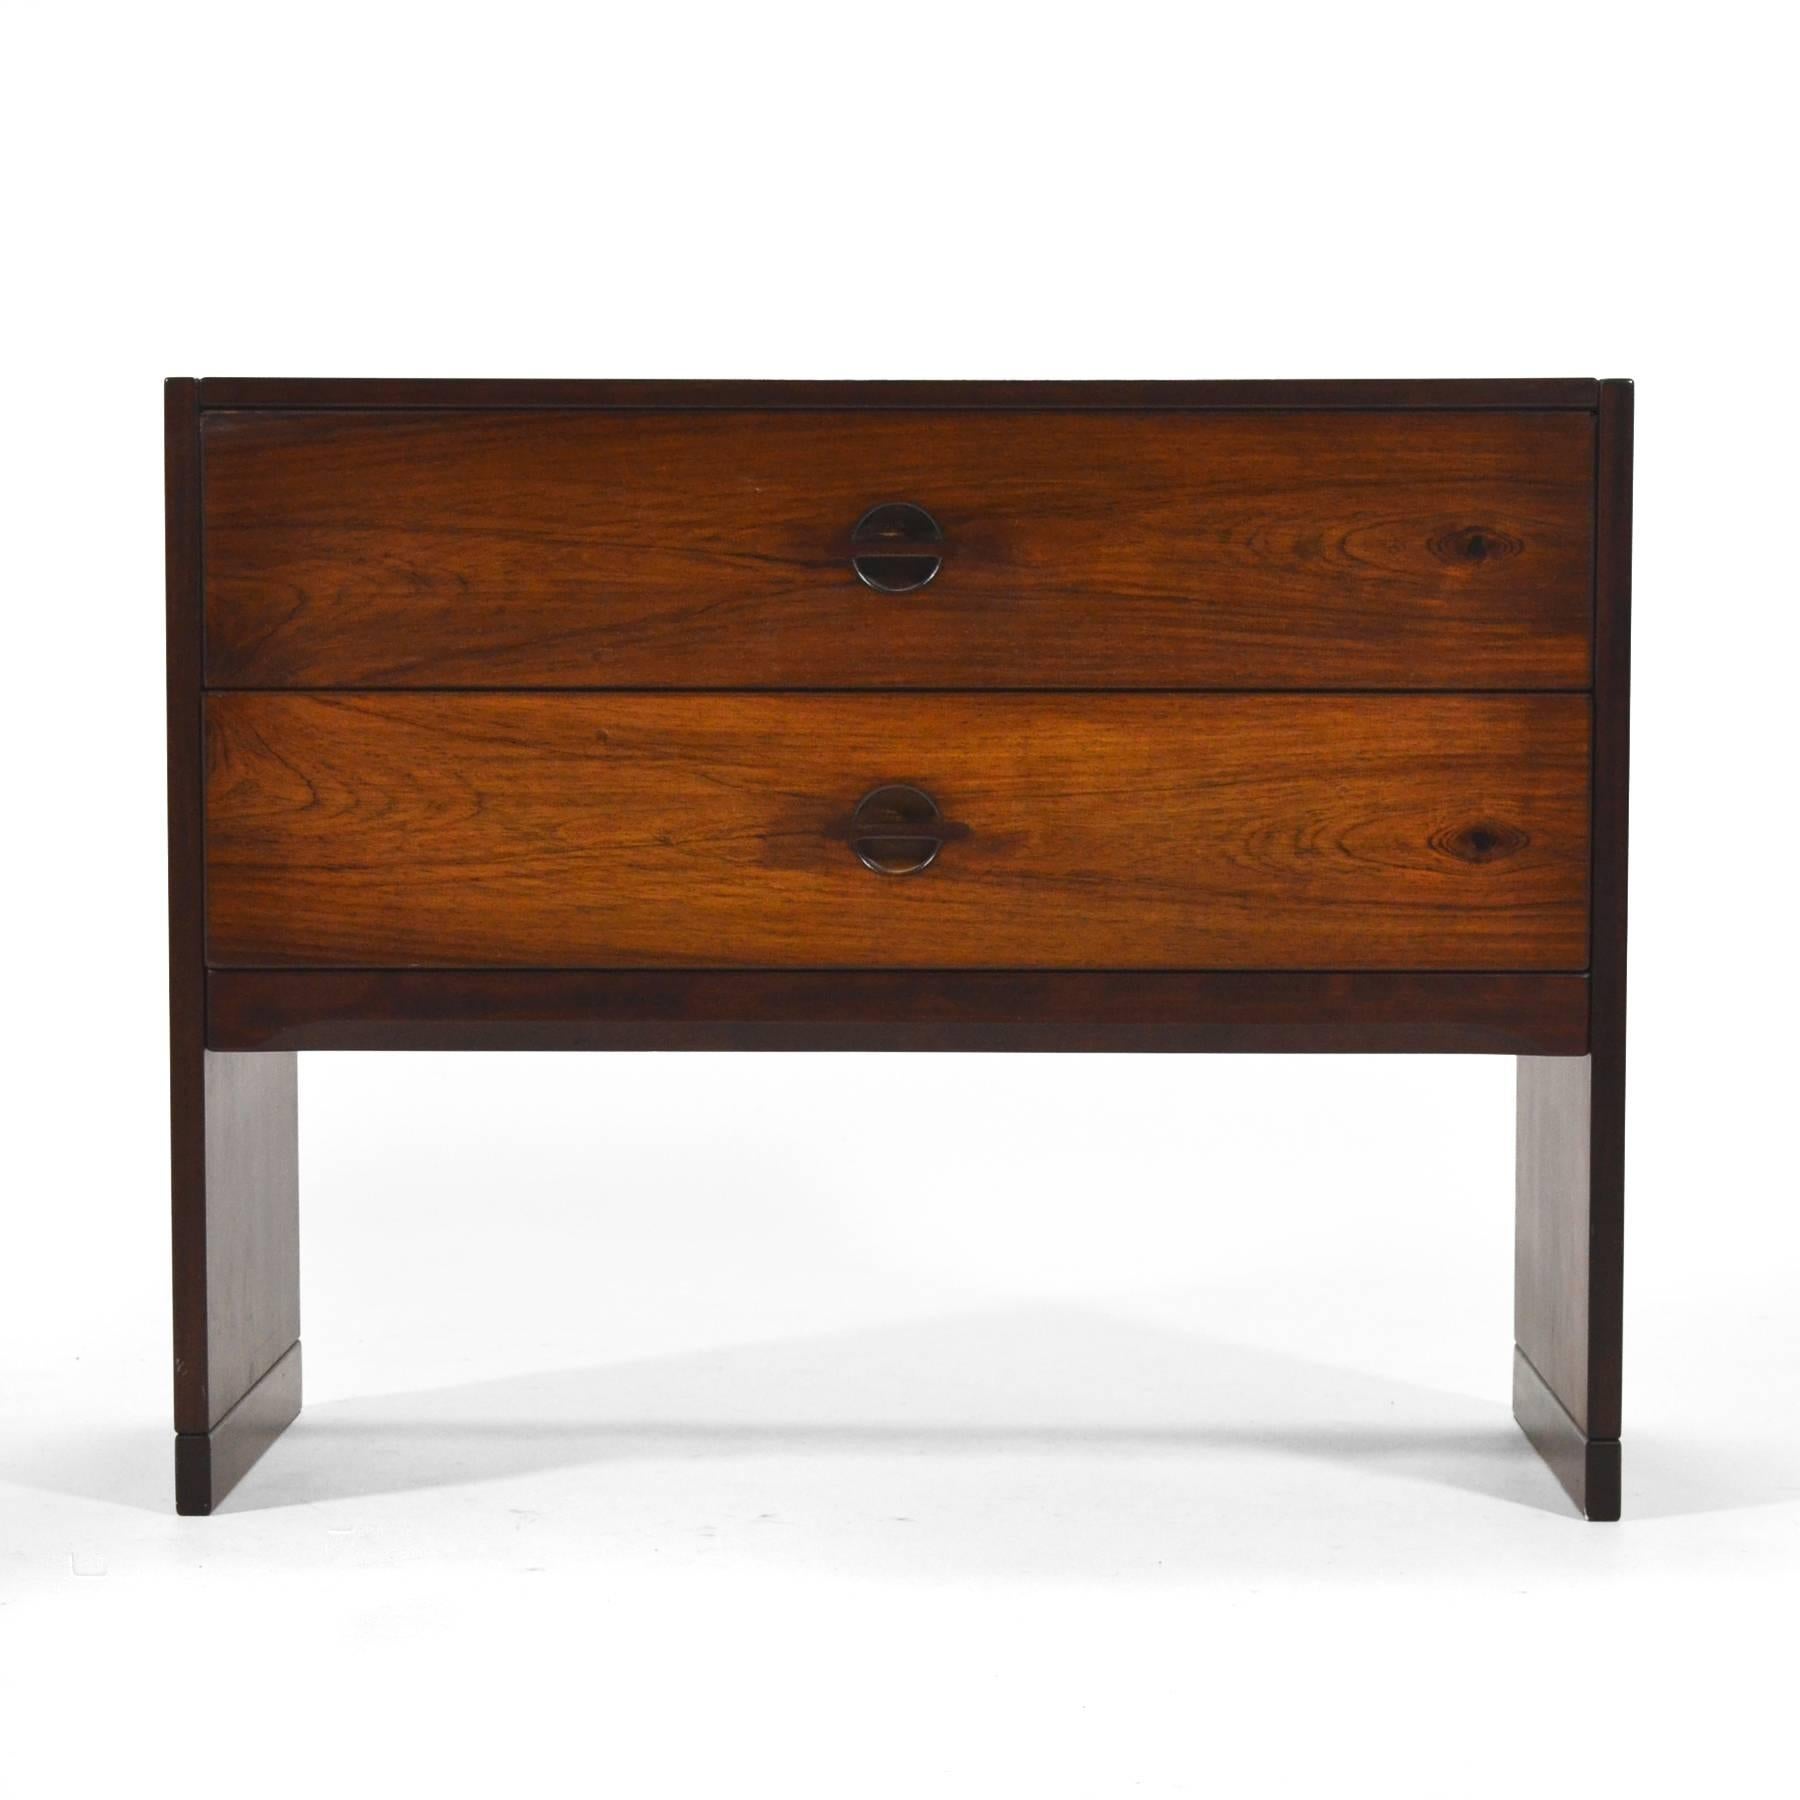 A beautiful Aksel Kjersgaard chest crafted by Odder Mobler of rich rosewood with fine detailing.